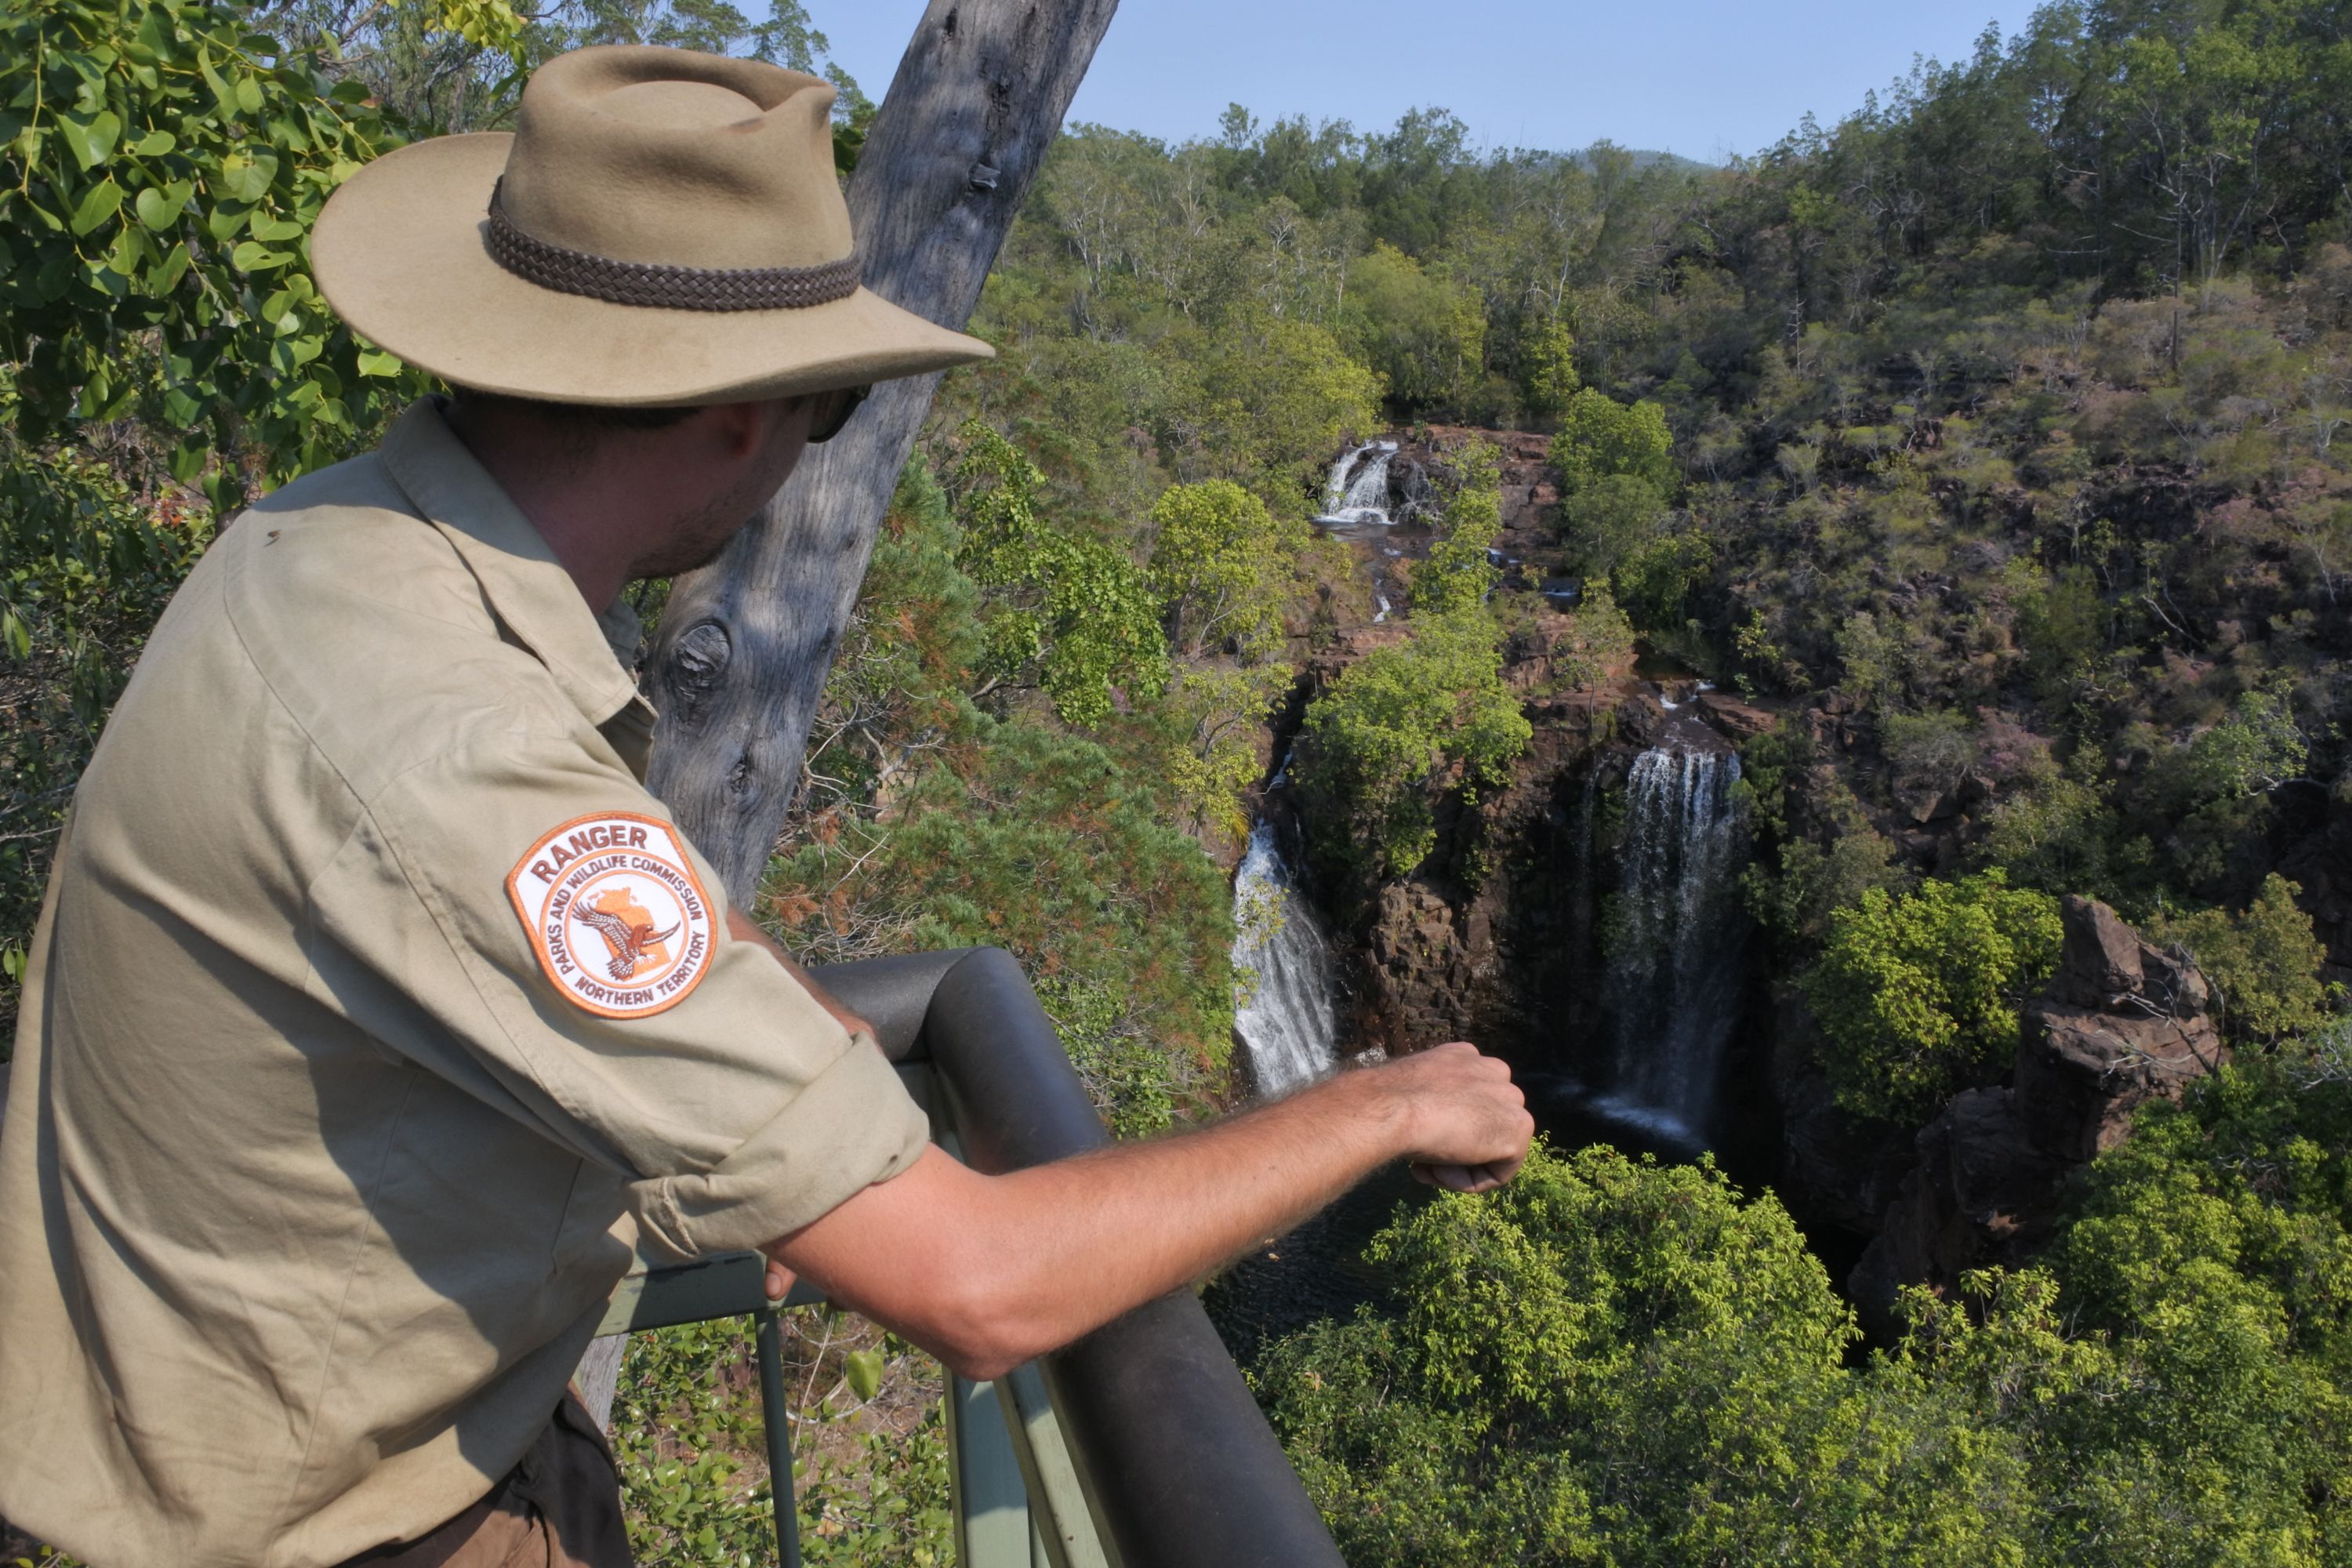 DARWIN, NT - JULY 11 2019:Park Ranger looking at Wangi Falls in Litchfield National Park.Australian park rangers working to protect Australia national parks resources and to protect park visitors.